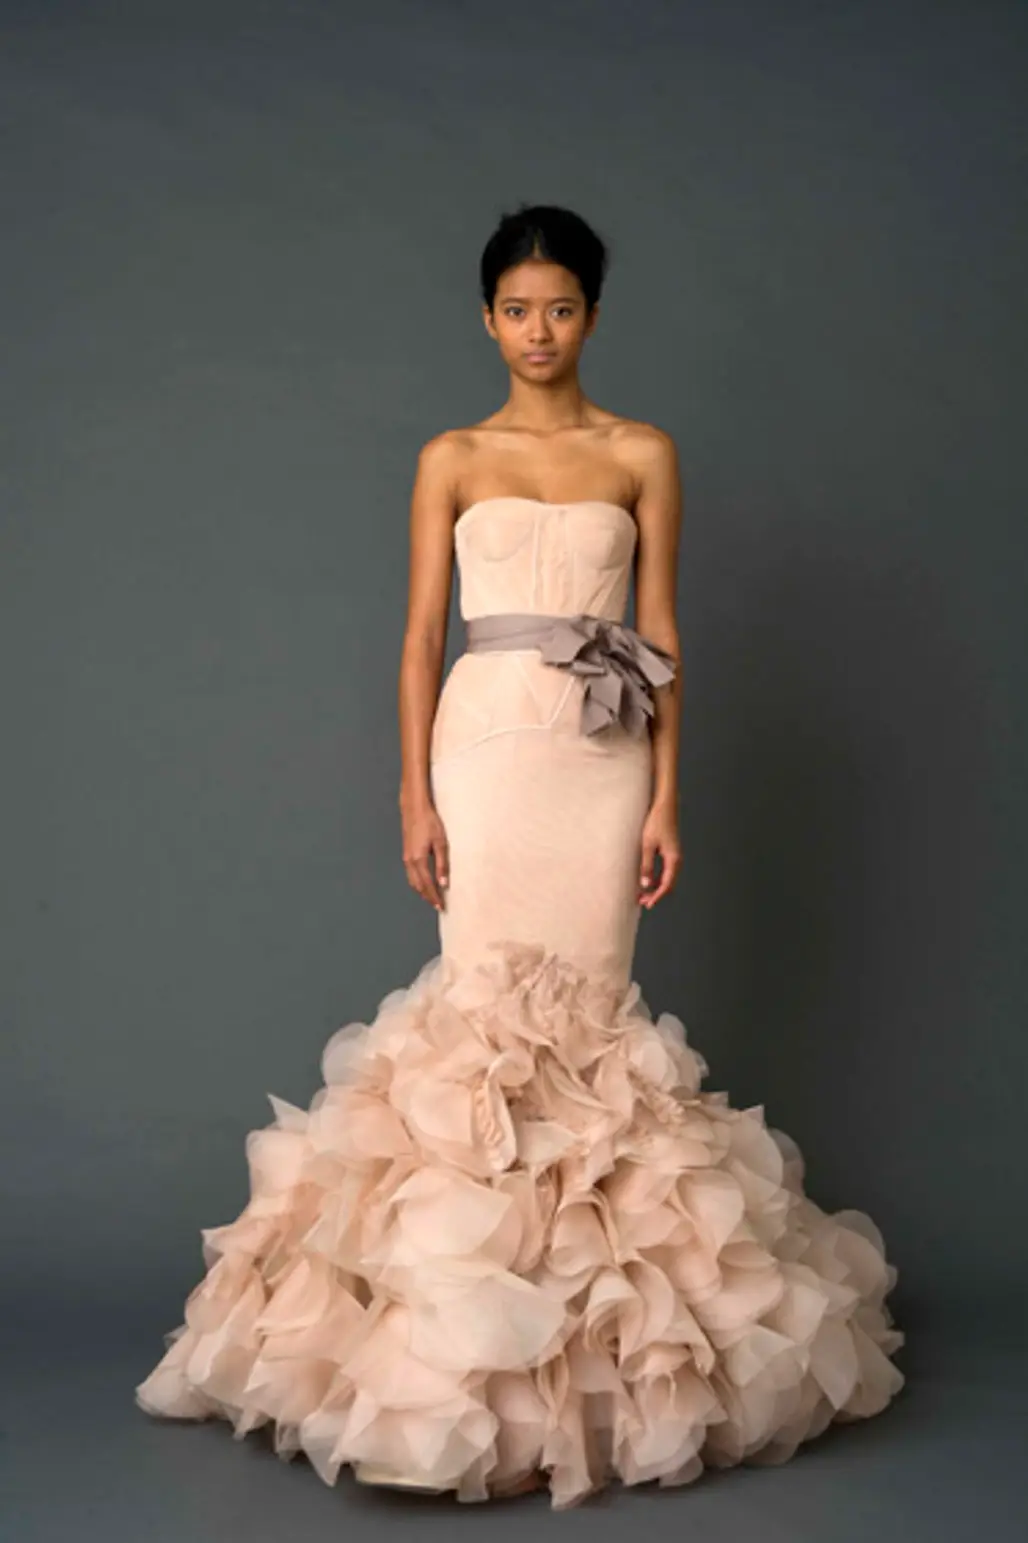 Vera Wang "Holly" Pink Strapless Mermaid Gown with Corset Bodice and Petal Skirt